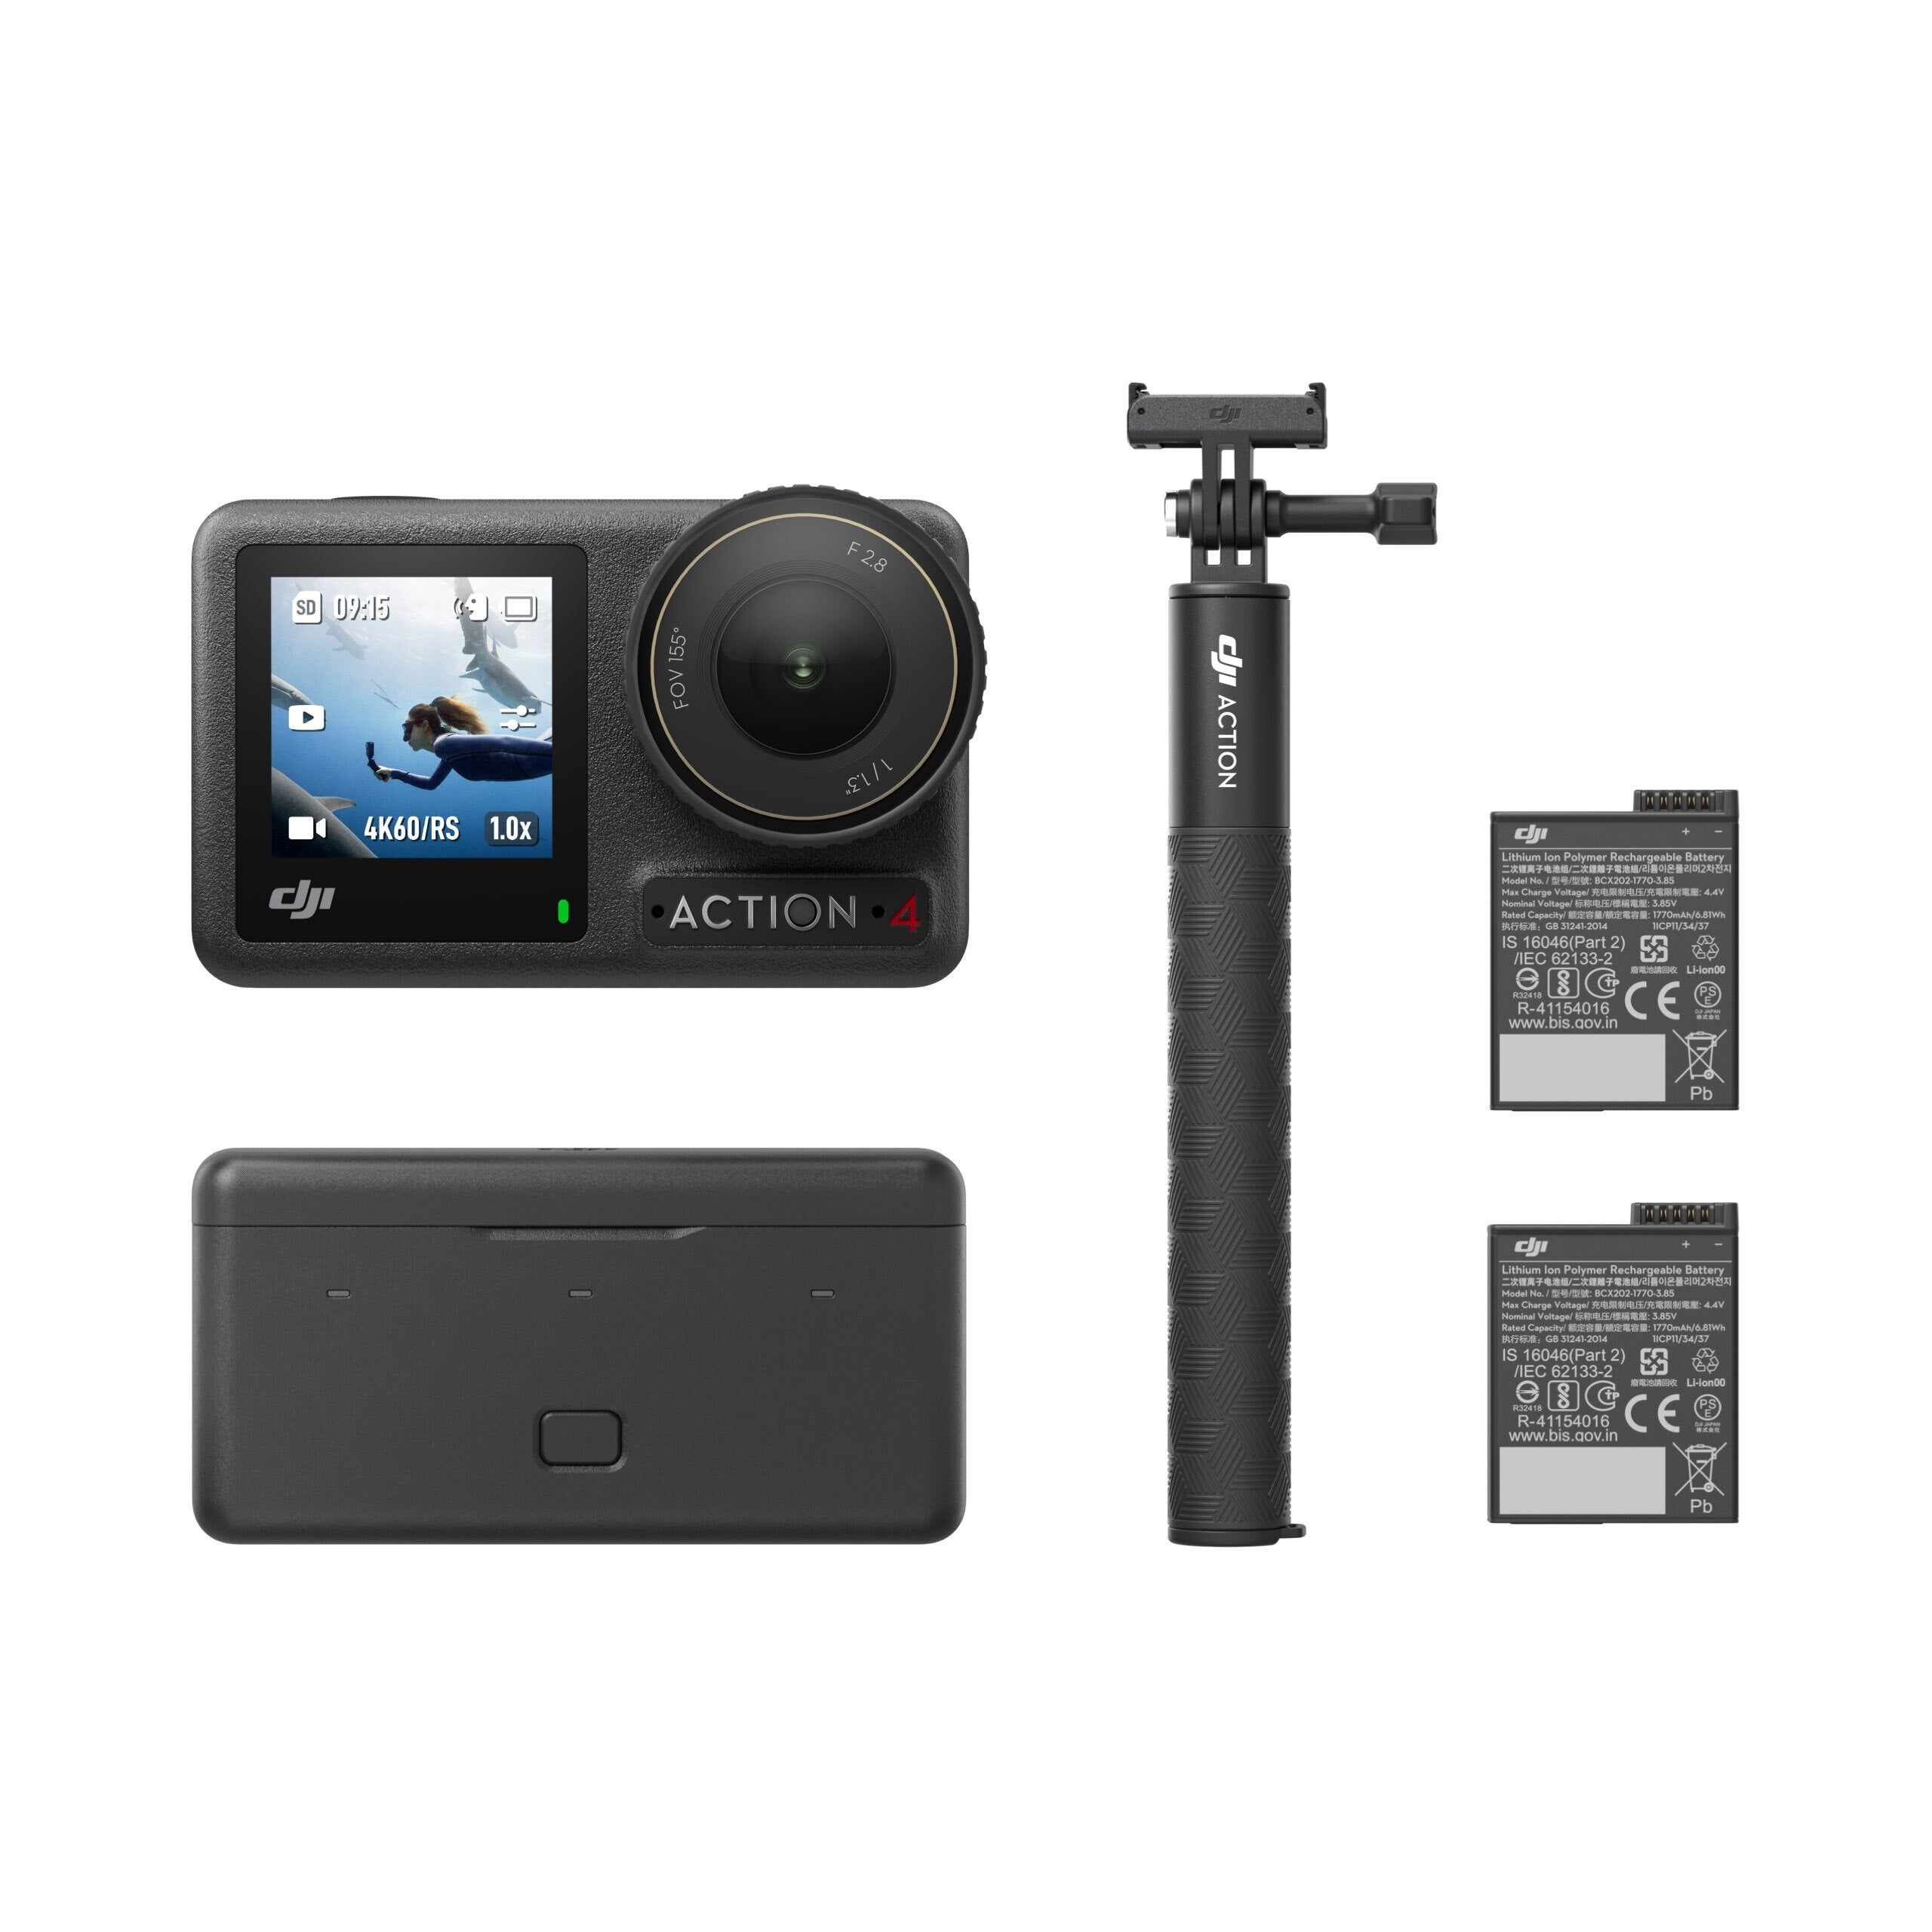 DJI Osmo Action 4 unveiled: larger sensor than before makes this a true GoPro Hero killer